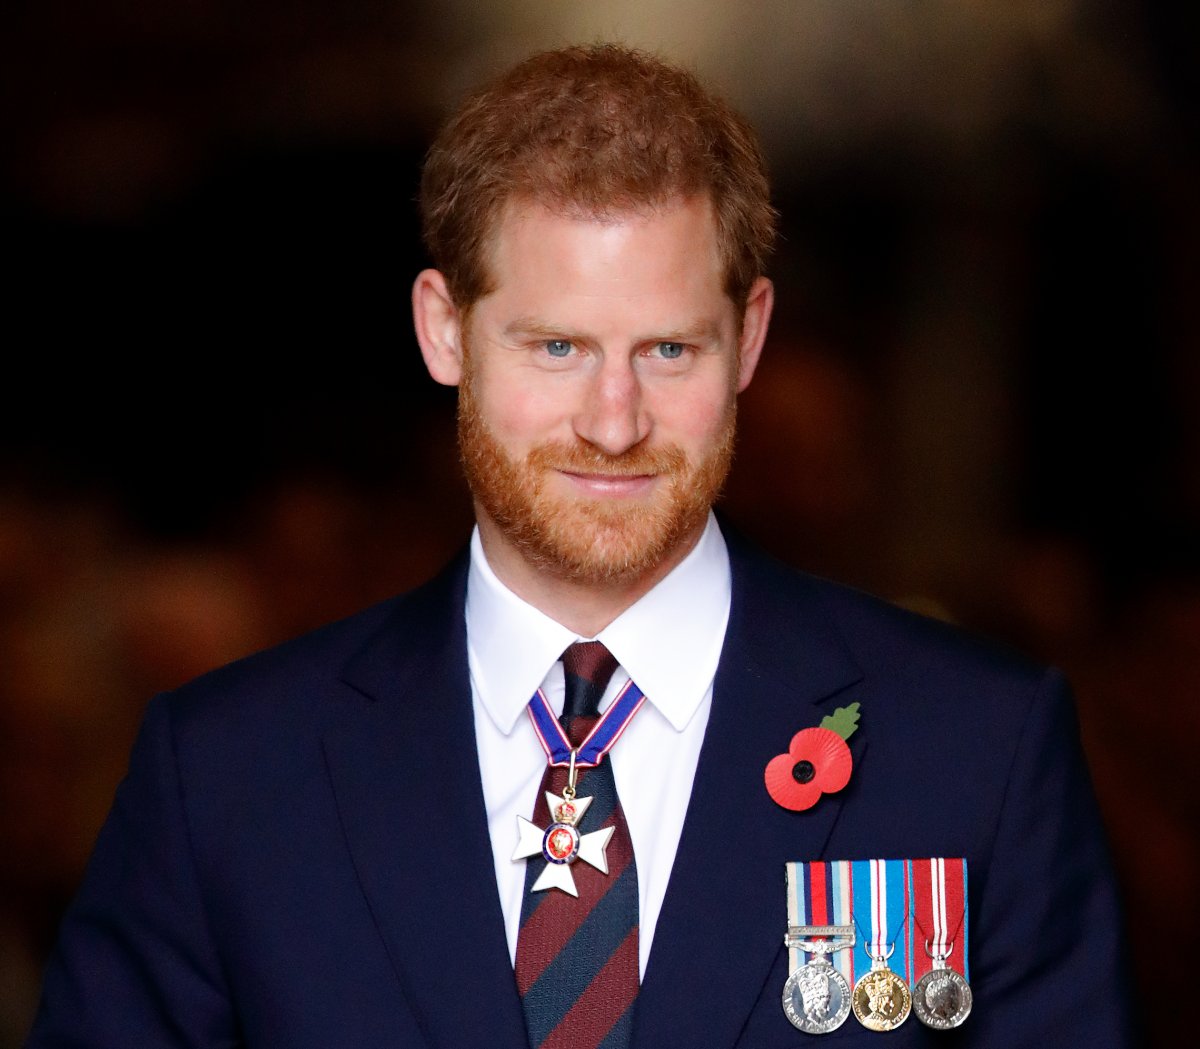 Drug and alcohol confession from Prince Harry #1